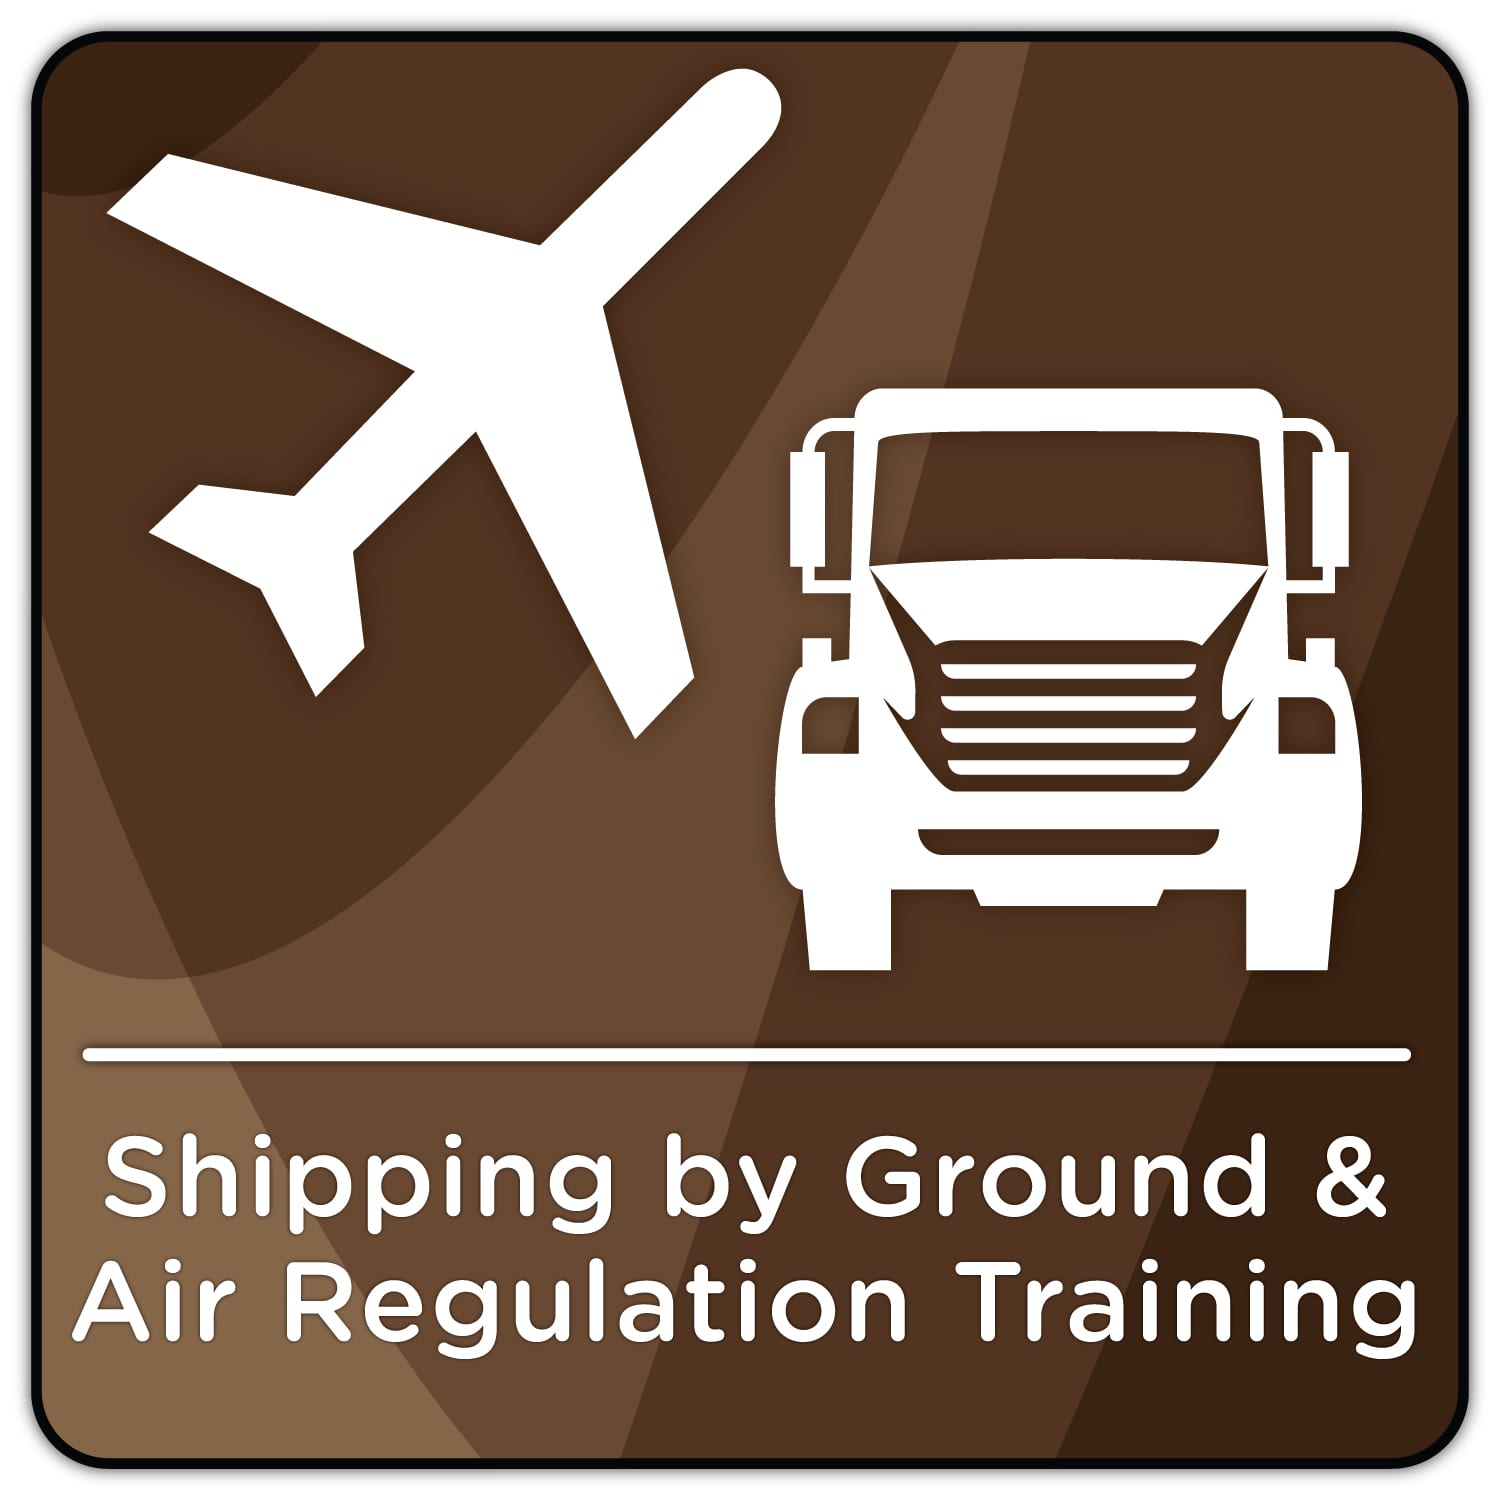 Shipping Dangerous Goods By Ground And Air In The Usa Icc Compliance